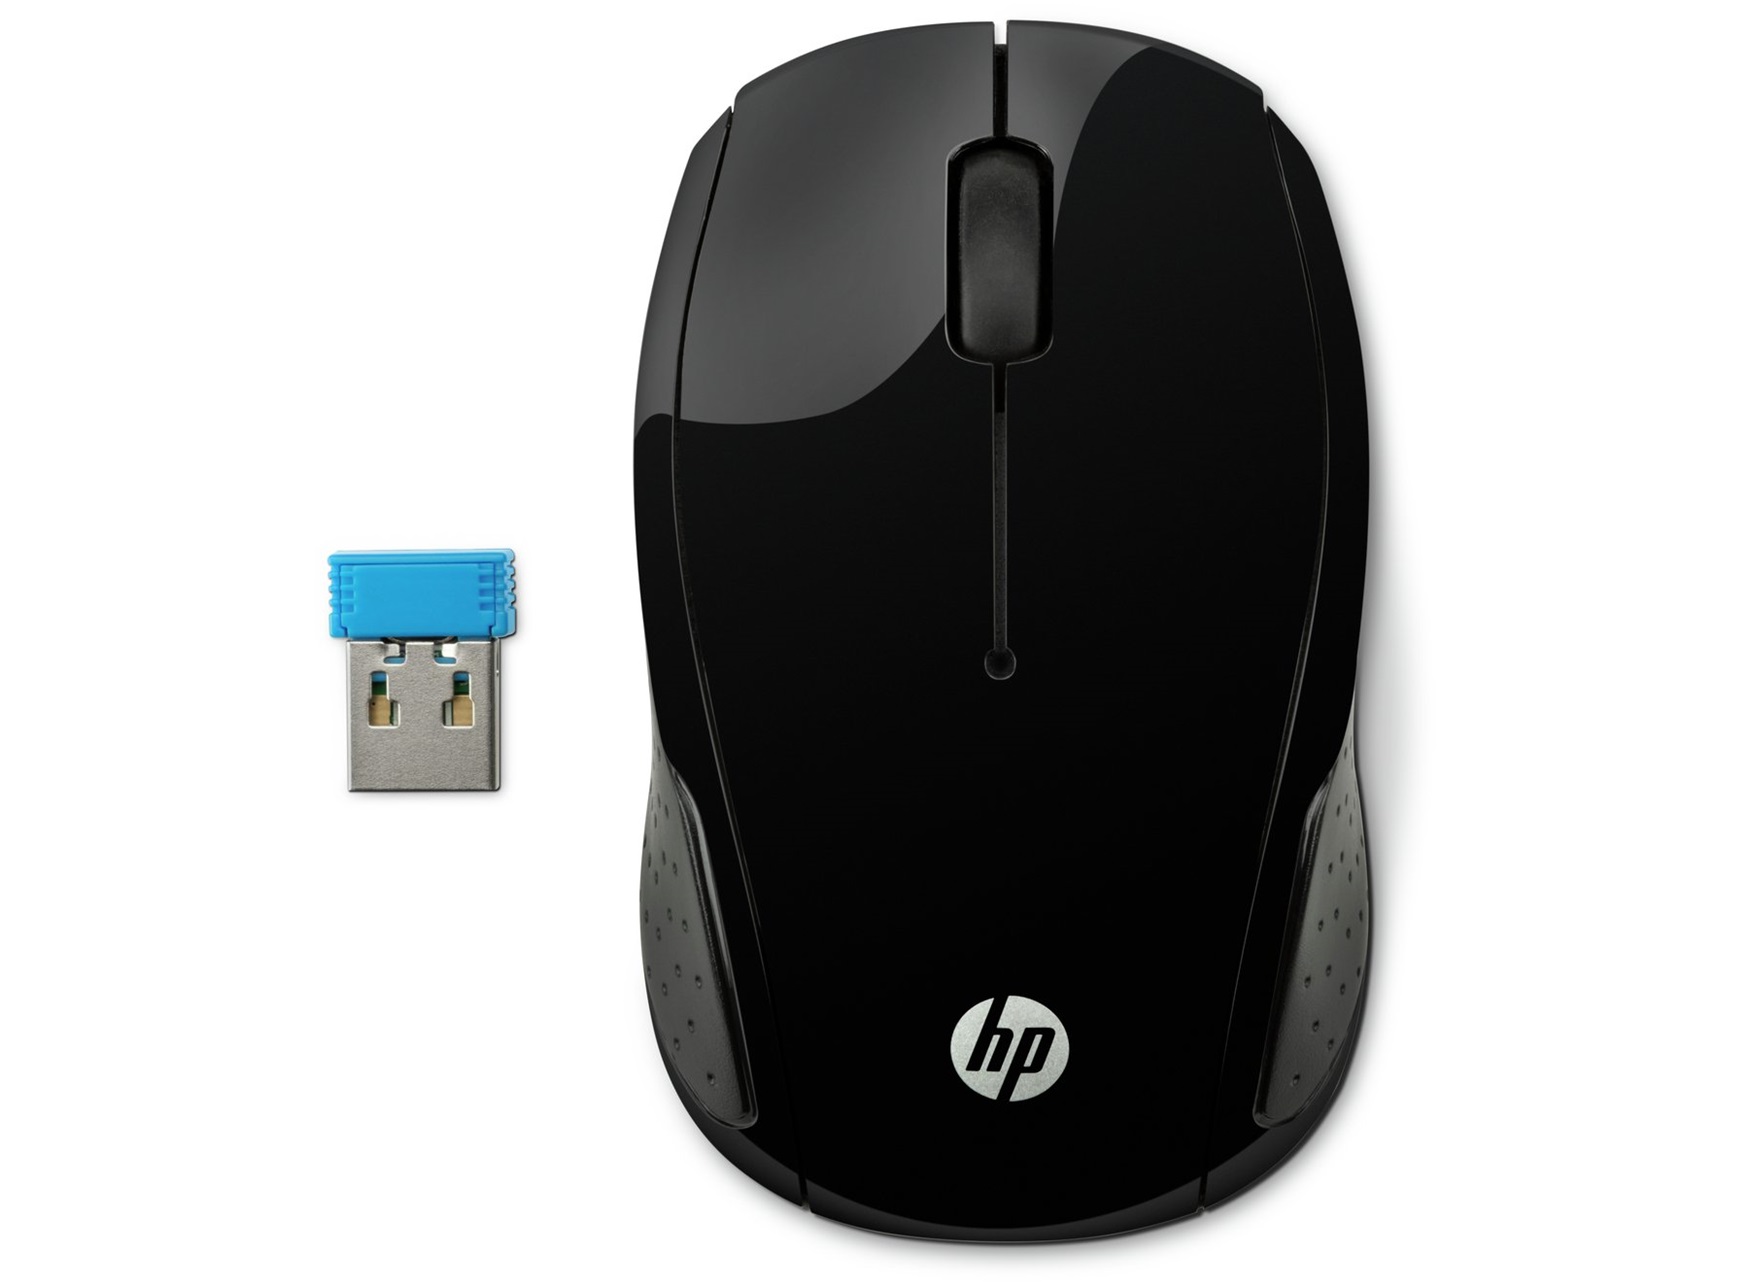 HP Wireless Mouse 200 | Lazada Indonesia